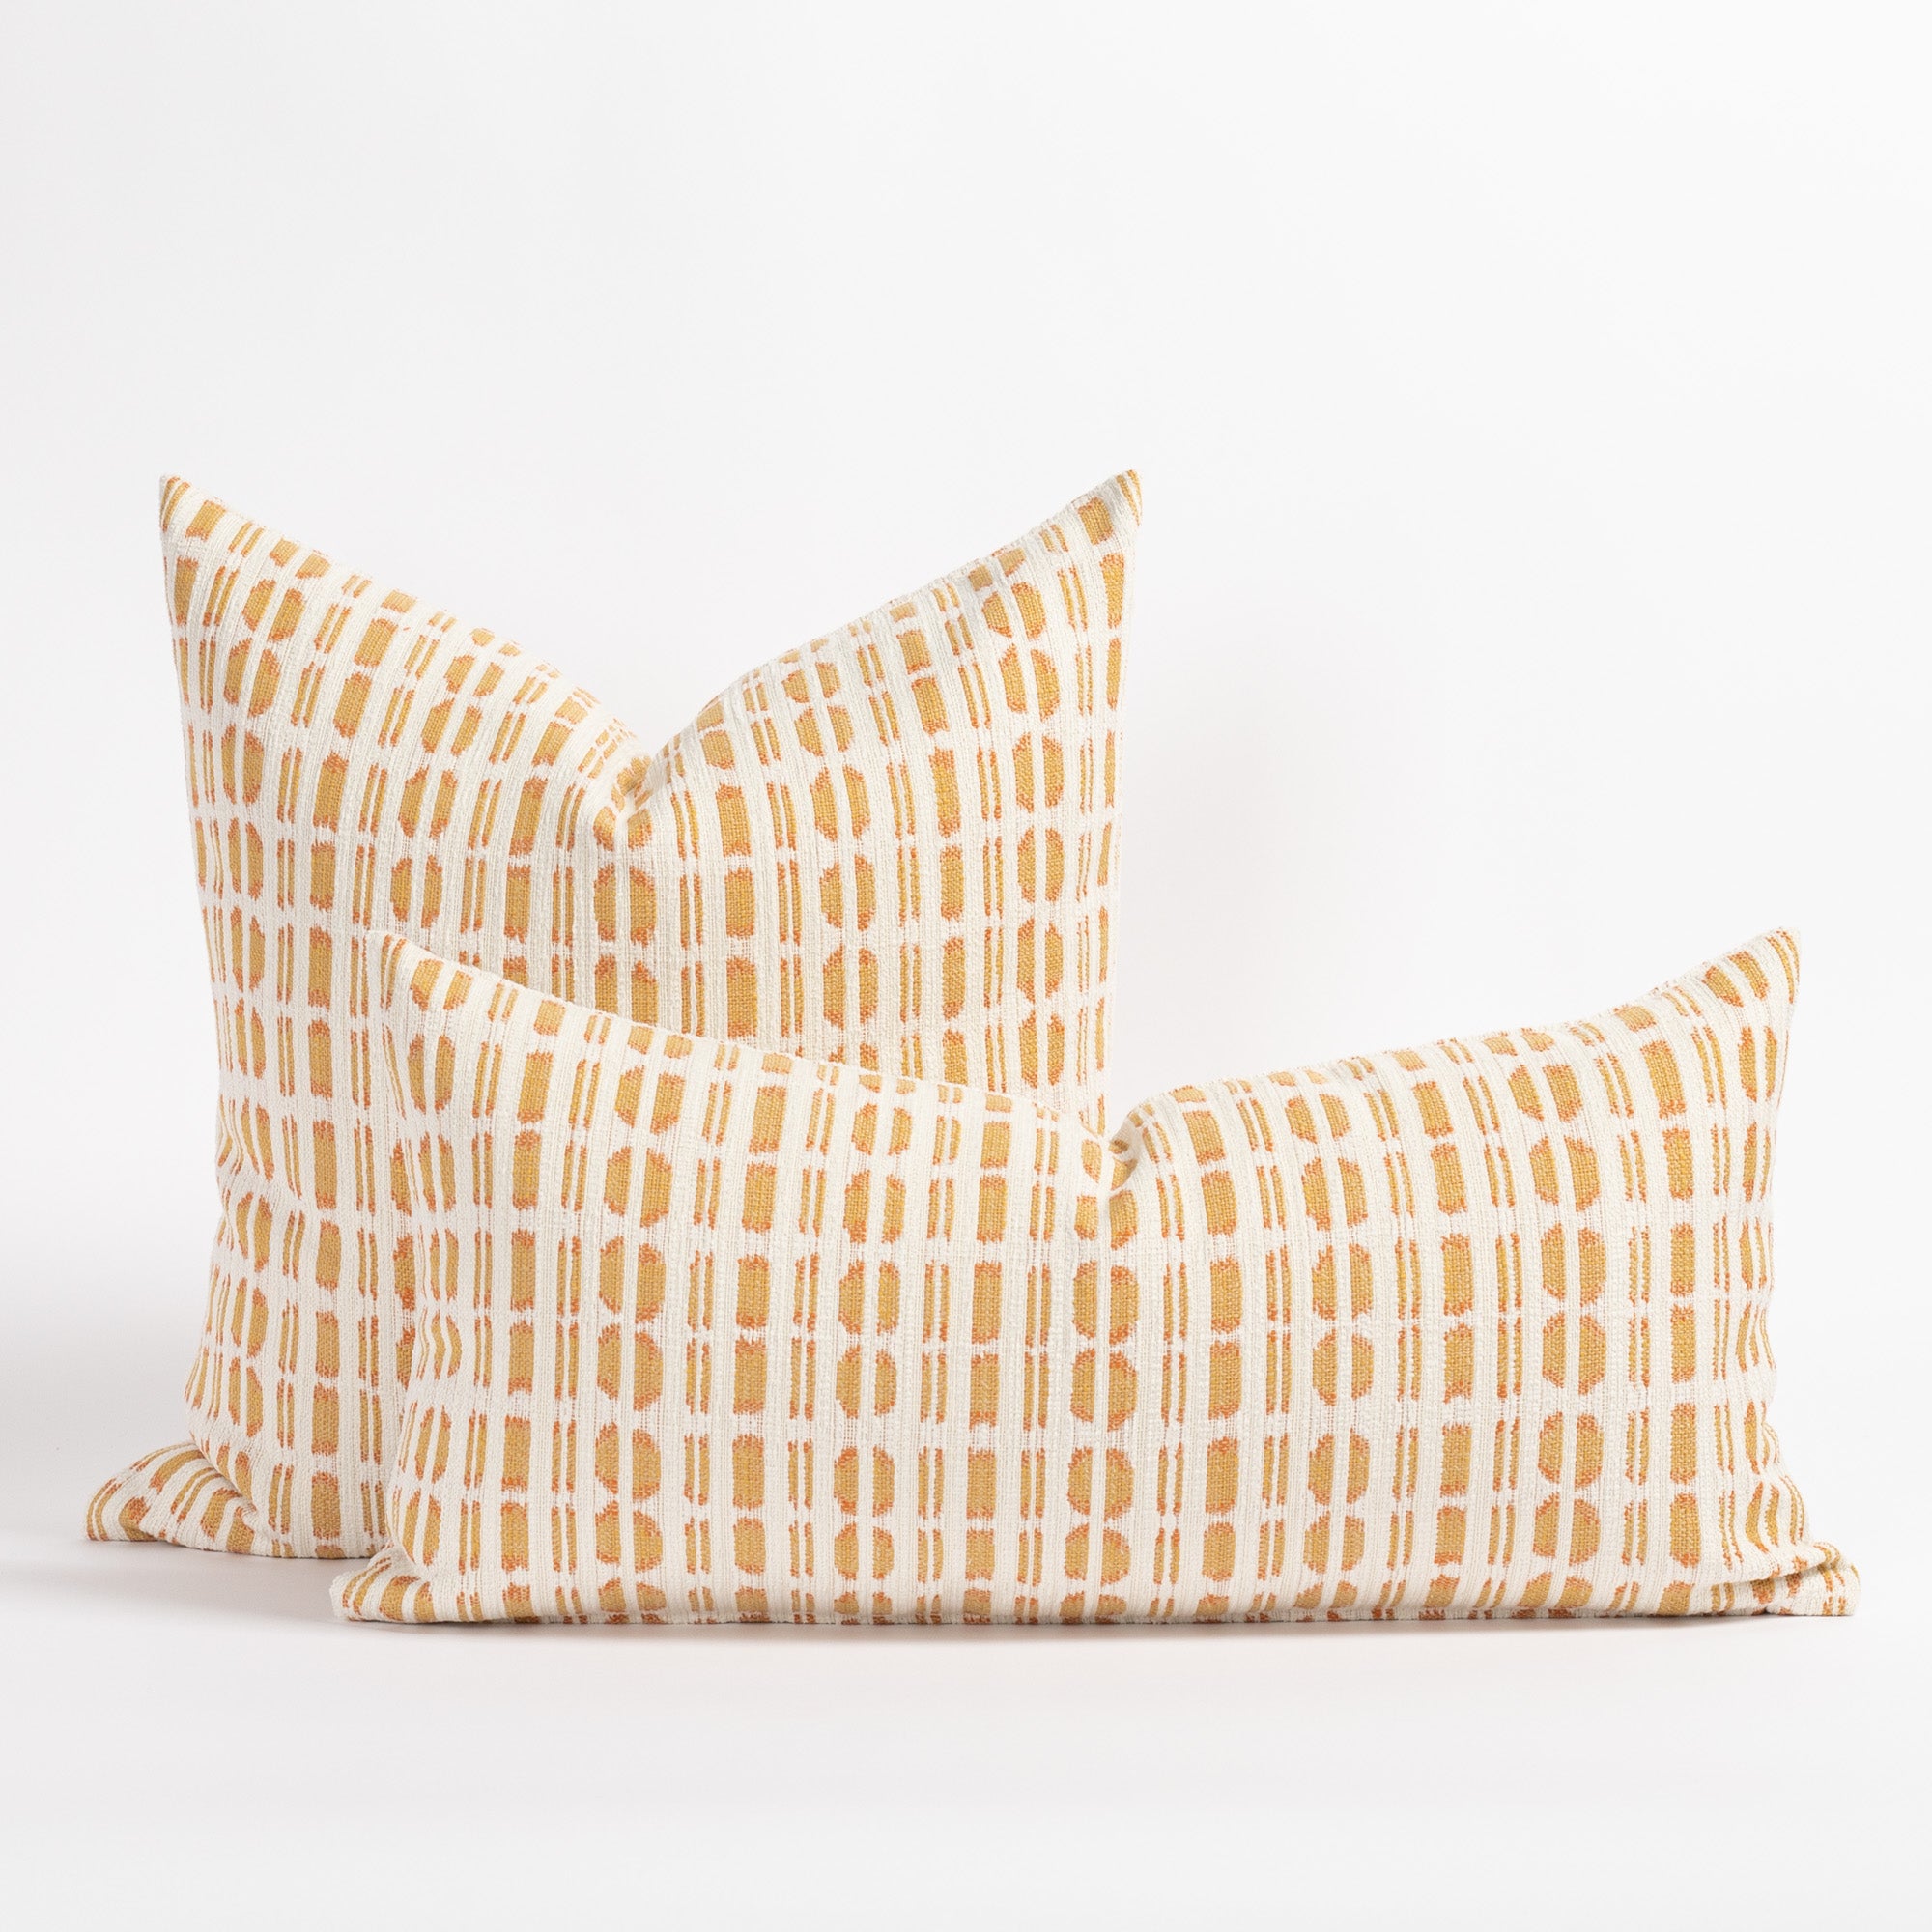 Calima Sunglow yellow, tangerine and white ikat patterned square and lumbar pillows